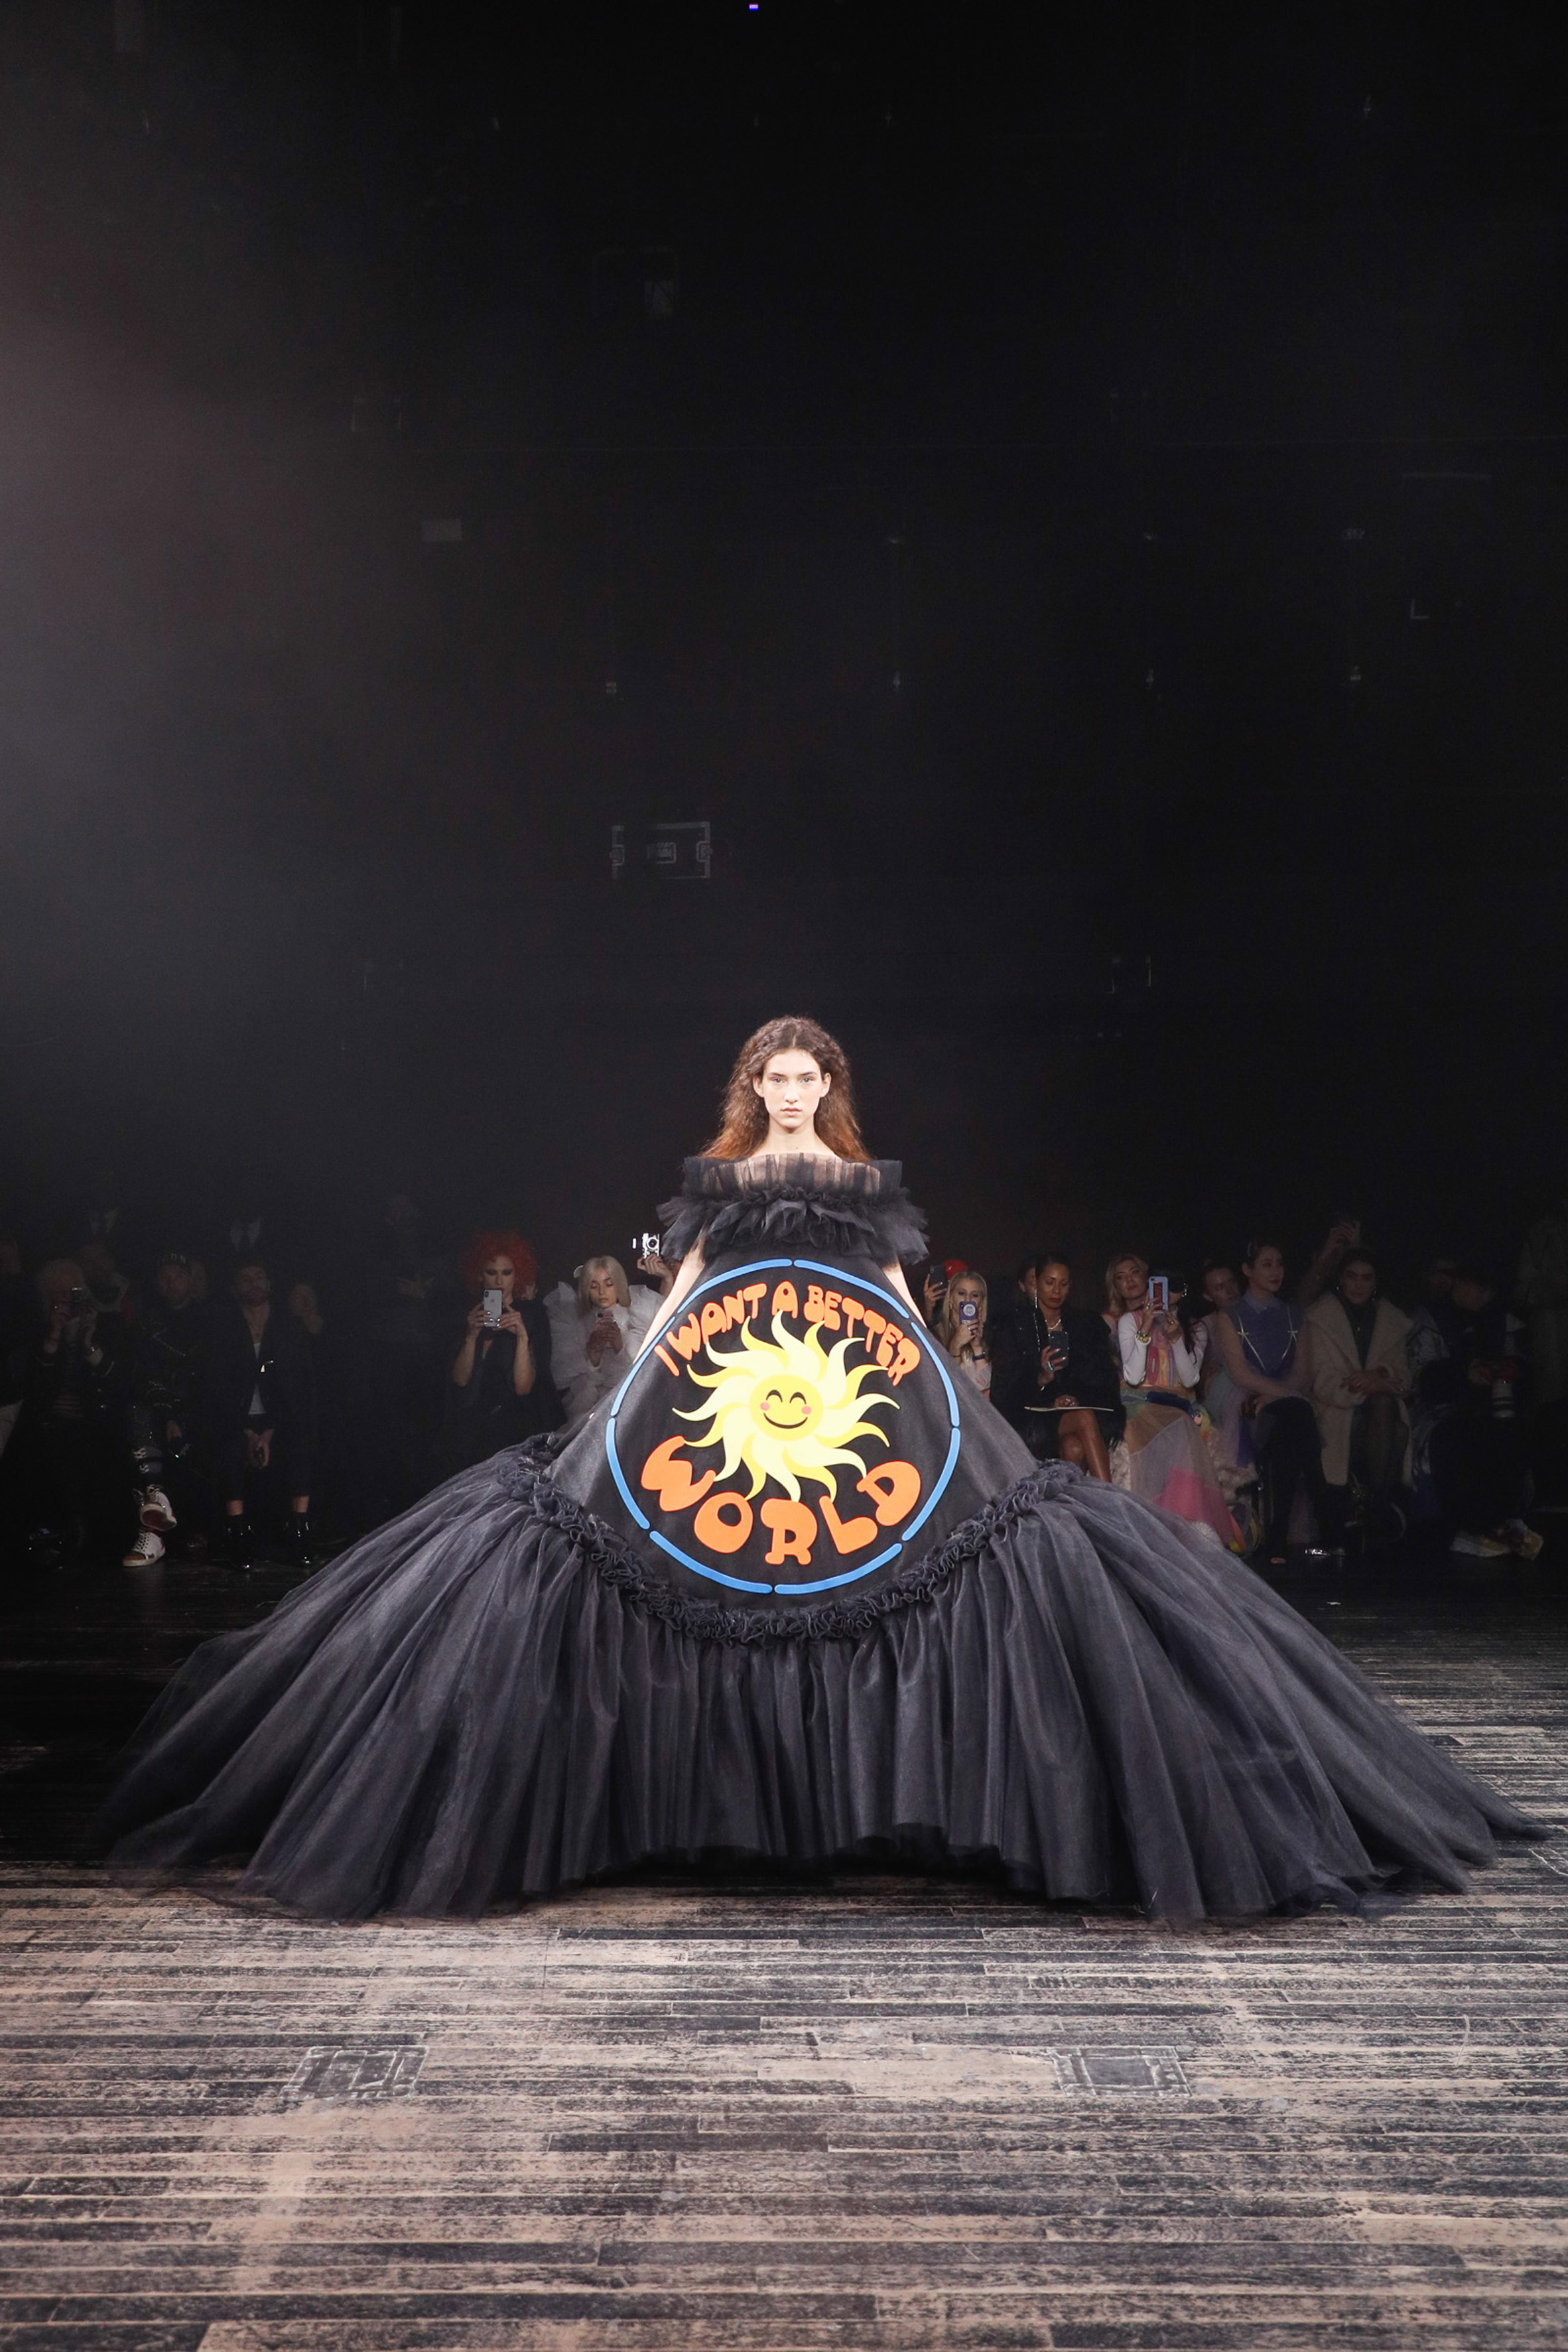 Viktor Rolf S Spring Summer 19 Couture Fashion Statements Collection Demonstrates The Expressive Power Of Clothing